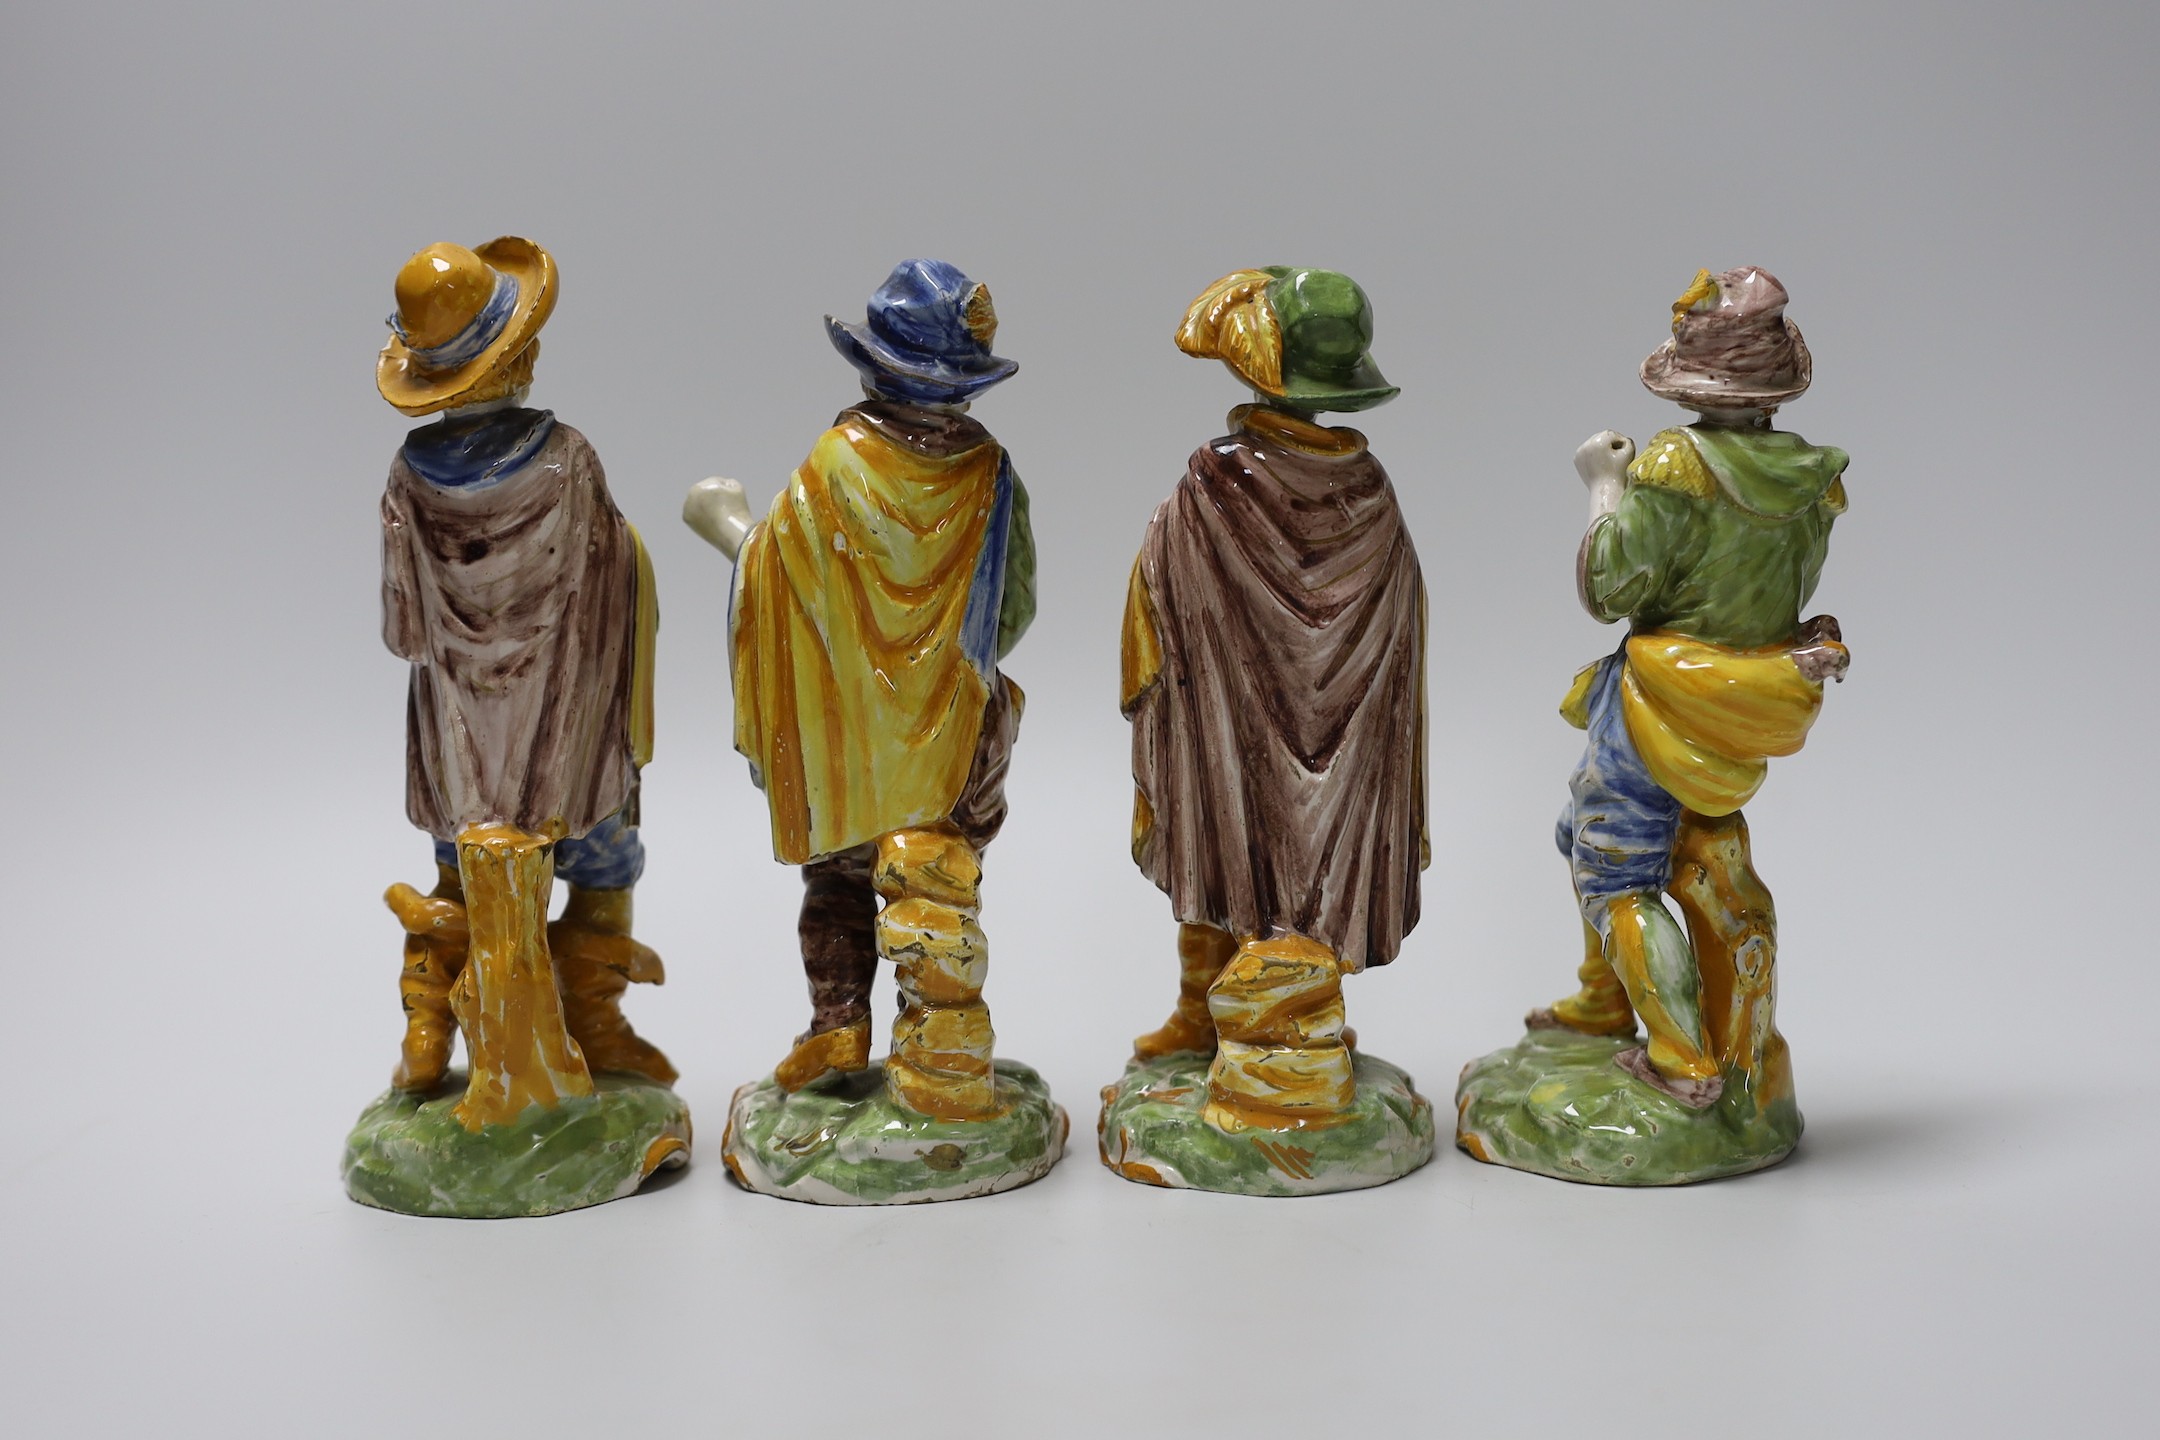 A set of four 19th century faience figures of street peddlers or performers - 18cm tall